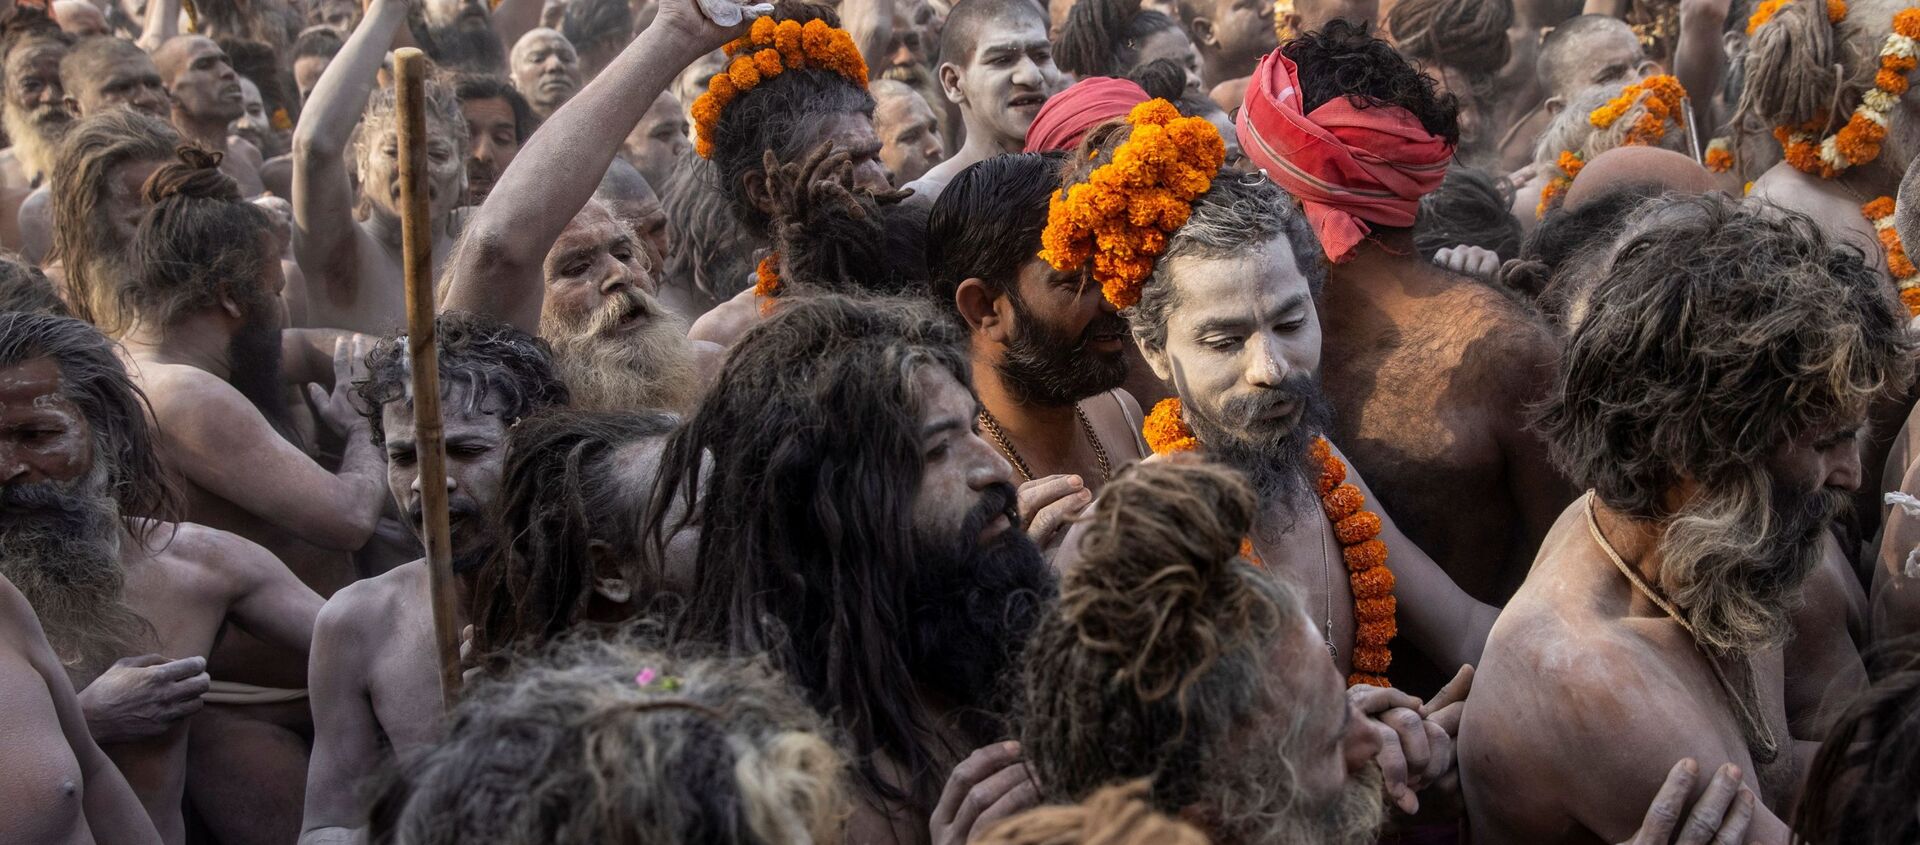 Naga Sadhus, or Hindu holy men participate in the procession for taking a dip in the Ganges river during Shahi Snan at Kumbh Mela, or the Pitcher Festival, amidst the spread of the coronavirus disease (COVID-19), in Haridwar, India, April 12, 2021 - Sputnik International, 1920, 12.04.2021